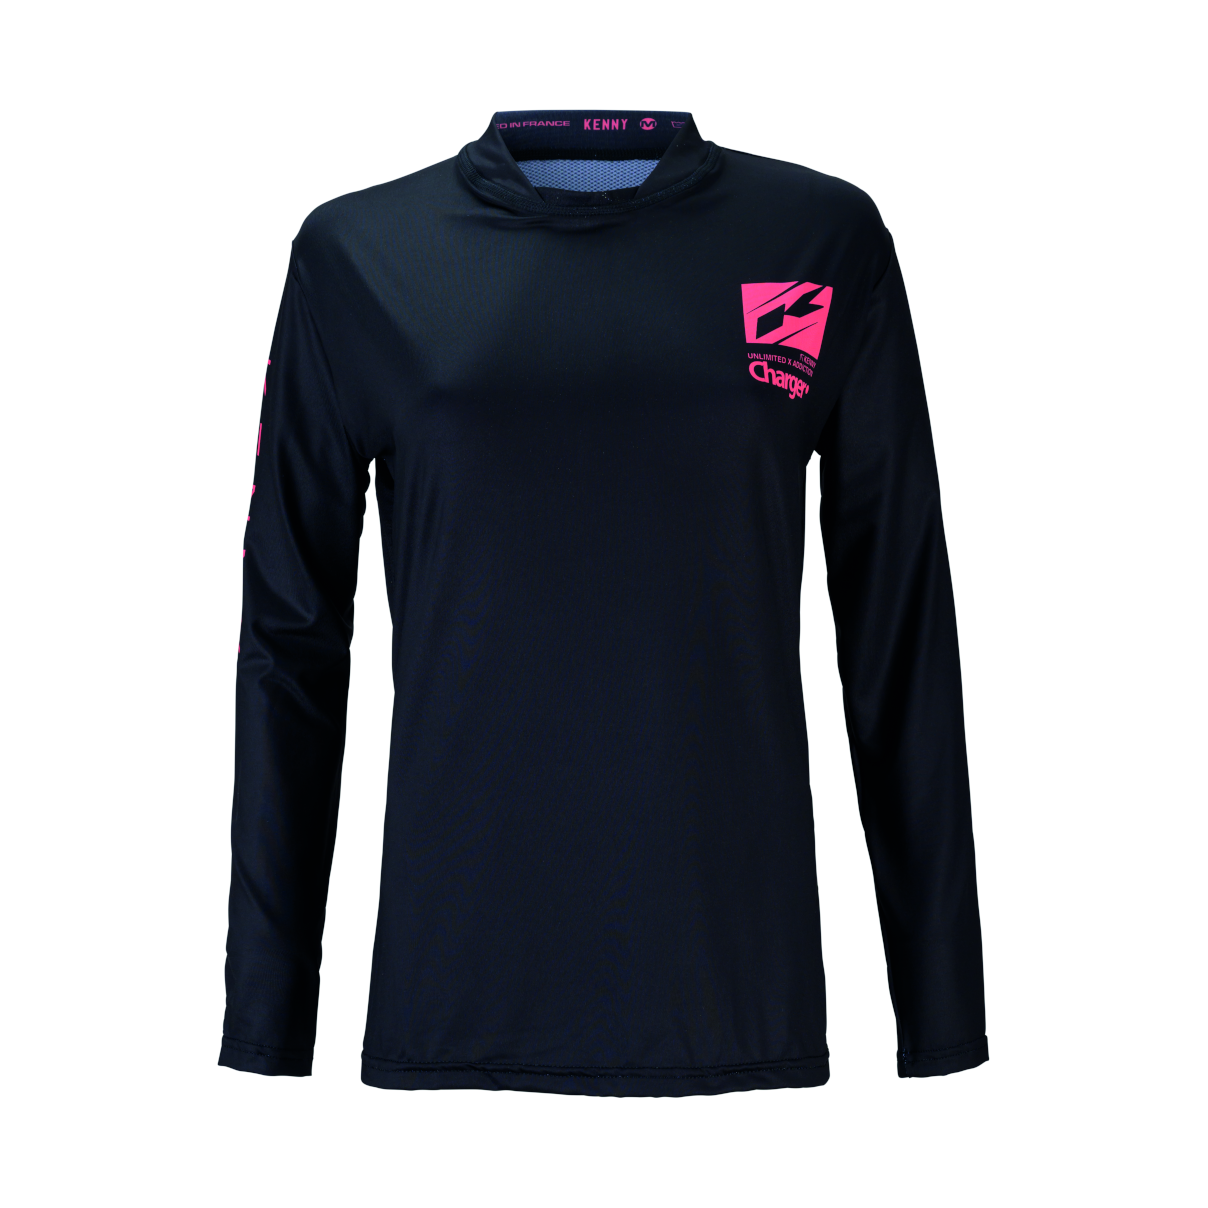 Kenny Racing Charger Women's Long Sleeve Jersey - Women's XS - Black - Image 1